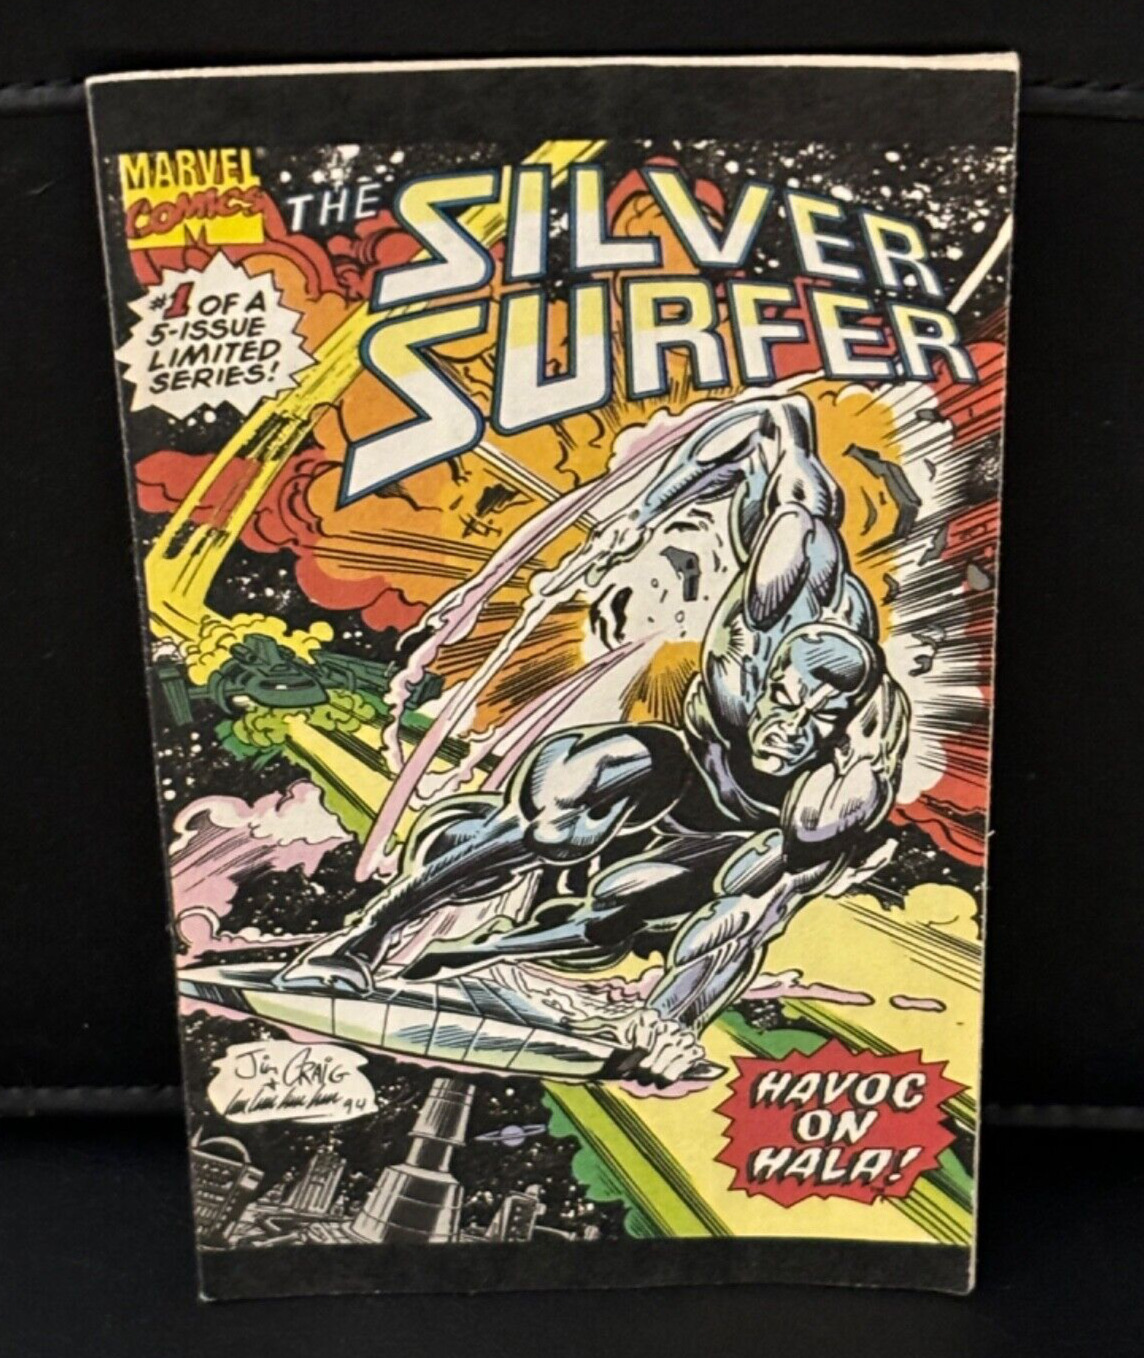 Marvel Comics 1994 Mini Comic The Silver Surfer #1 Limited Series Excellent cond